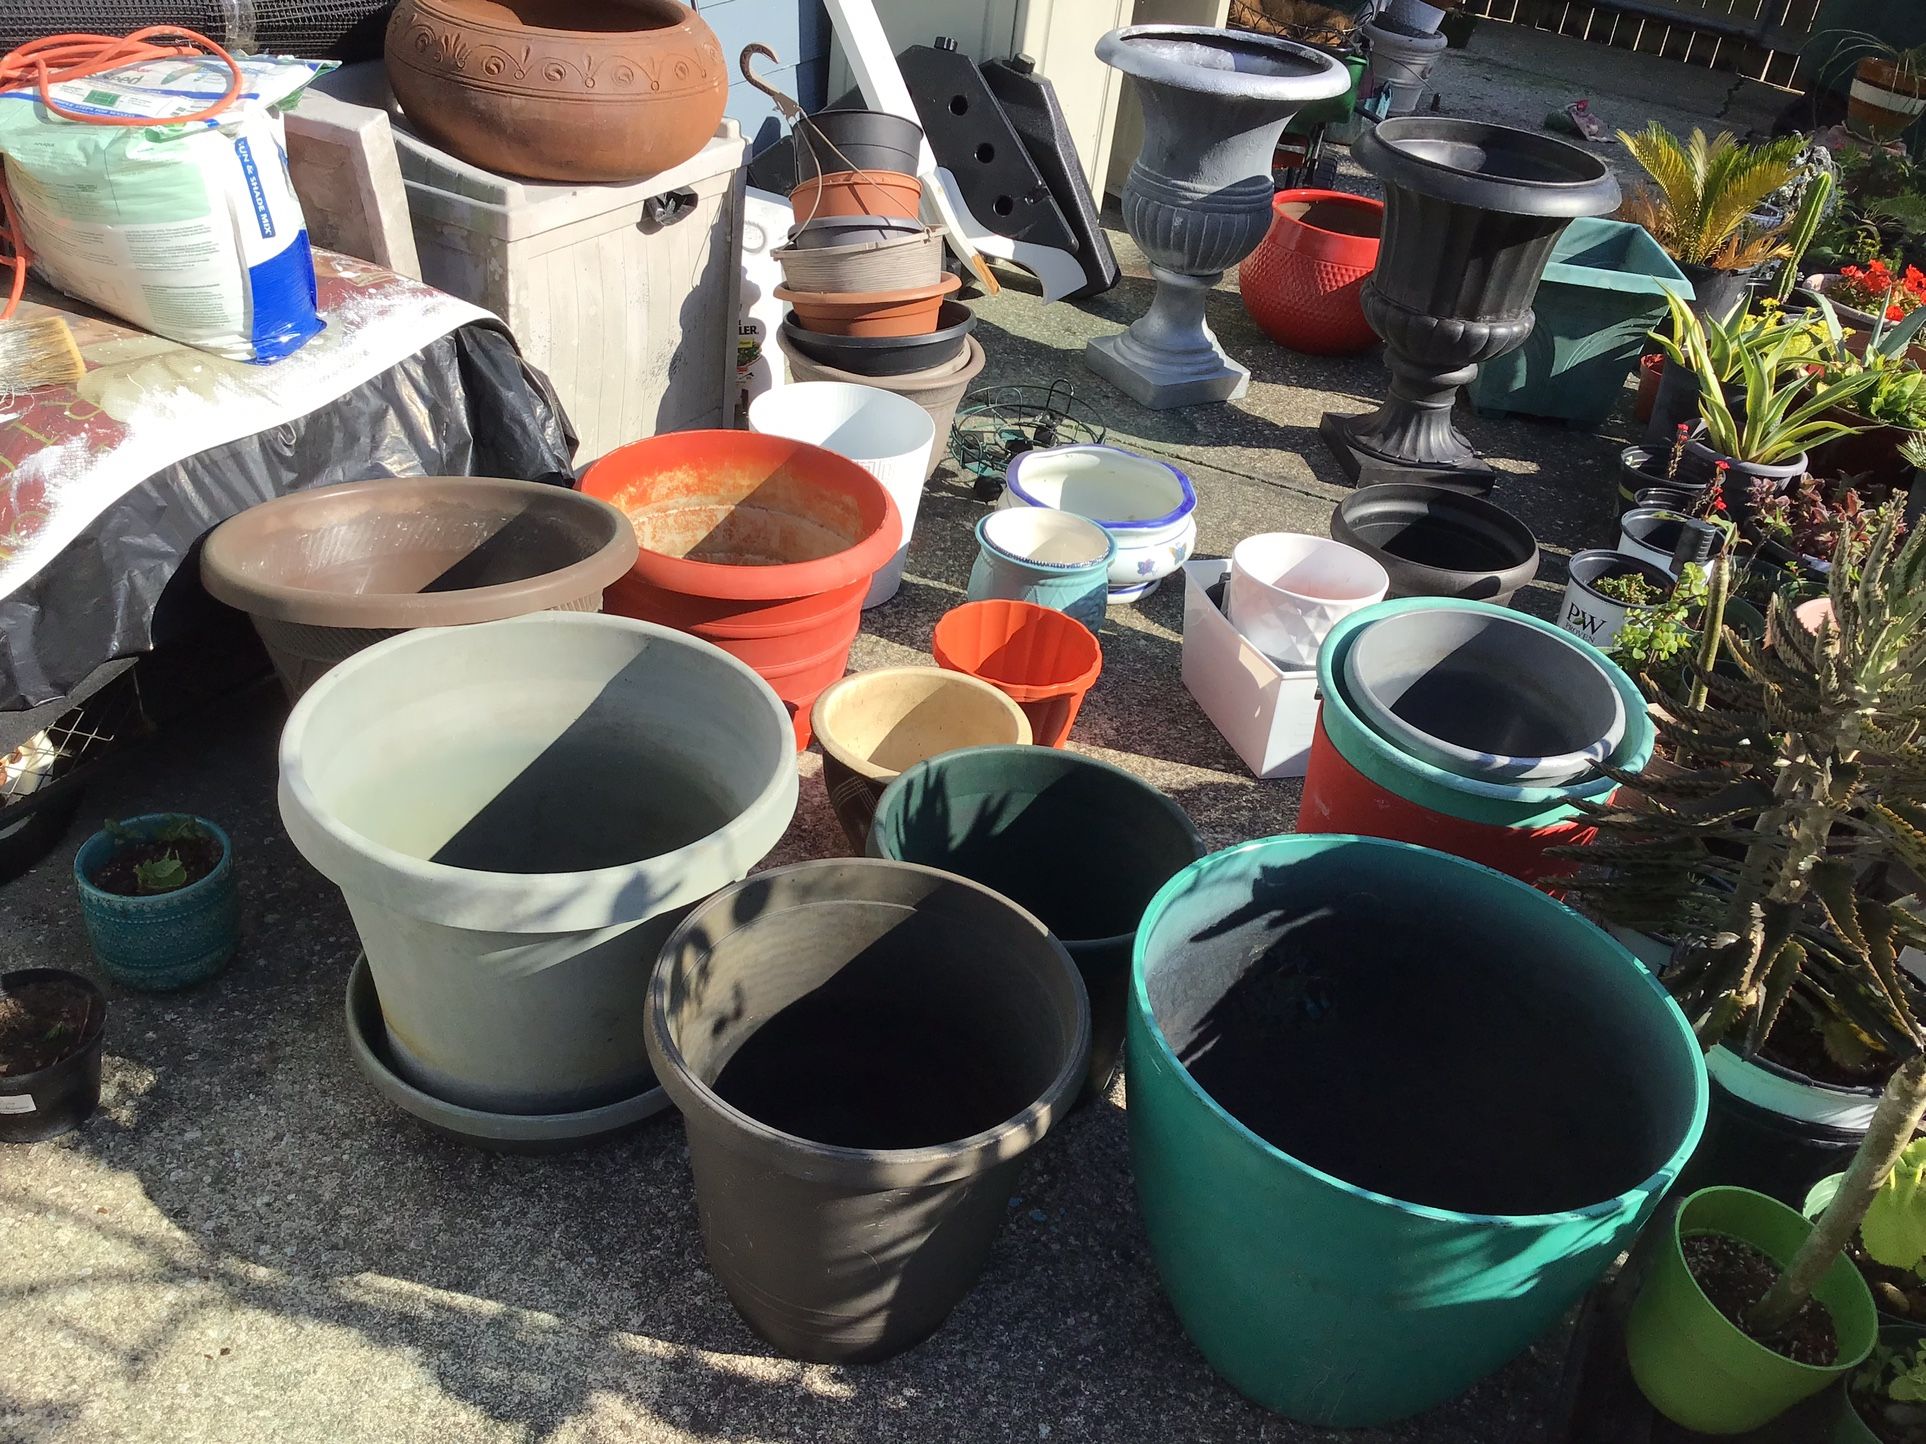 I HAVE  LOTS OF FLOWER POTS FOR SALE ALL KINDS . PRICES START FROM $1 Up To $15